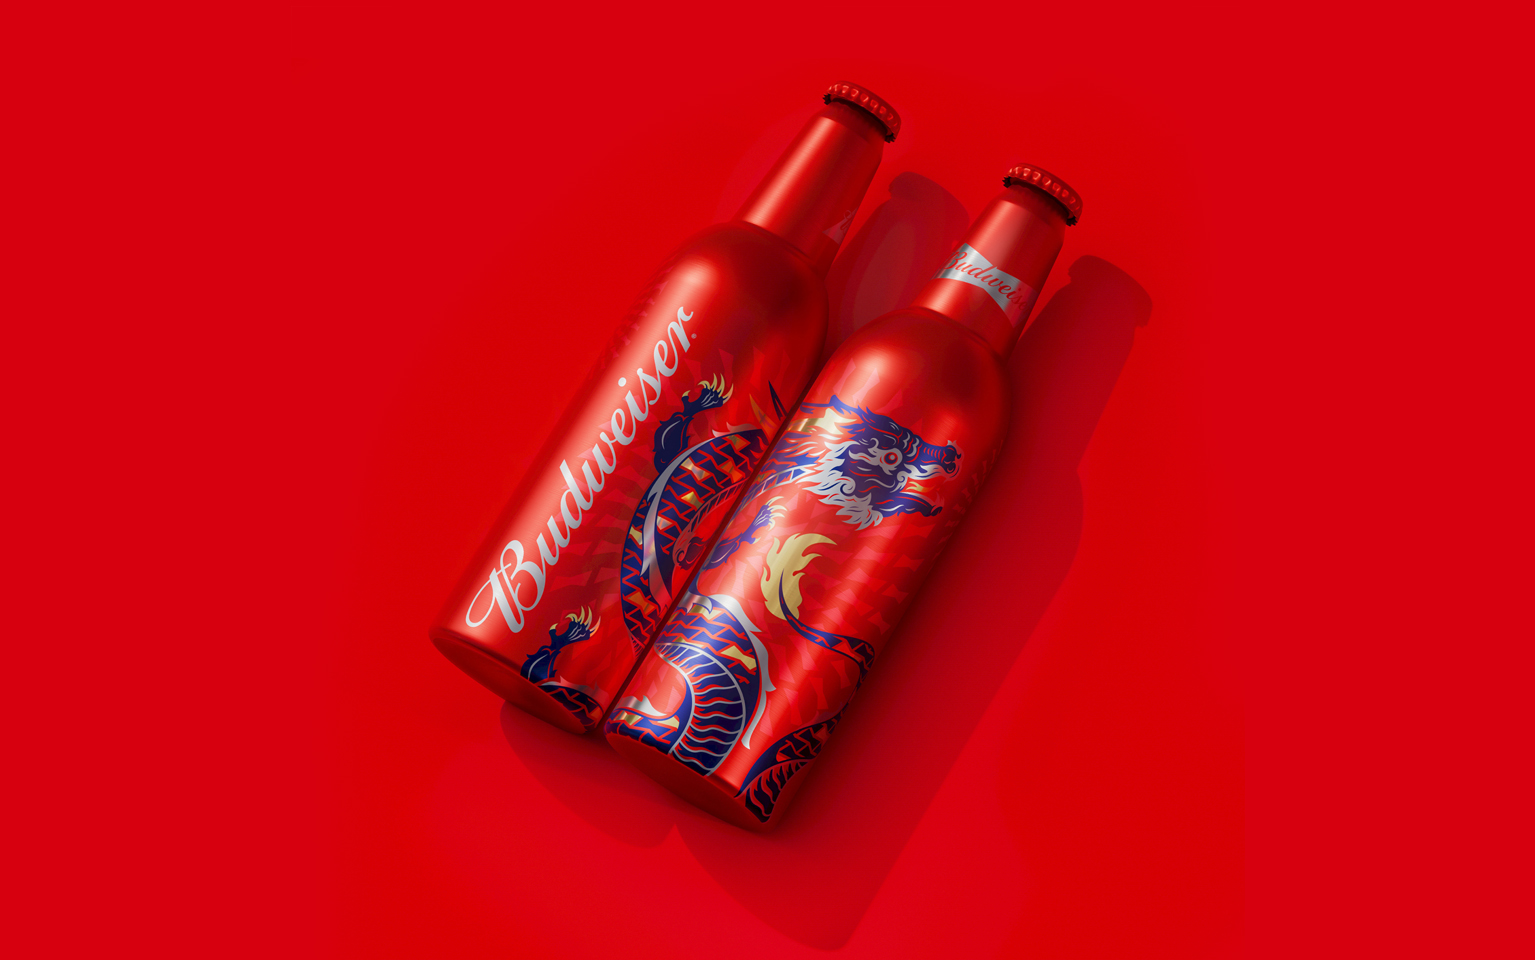 Budweiser Introduces Limited Edition Packaging Design for Lunar New Year